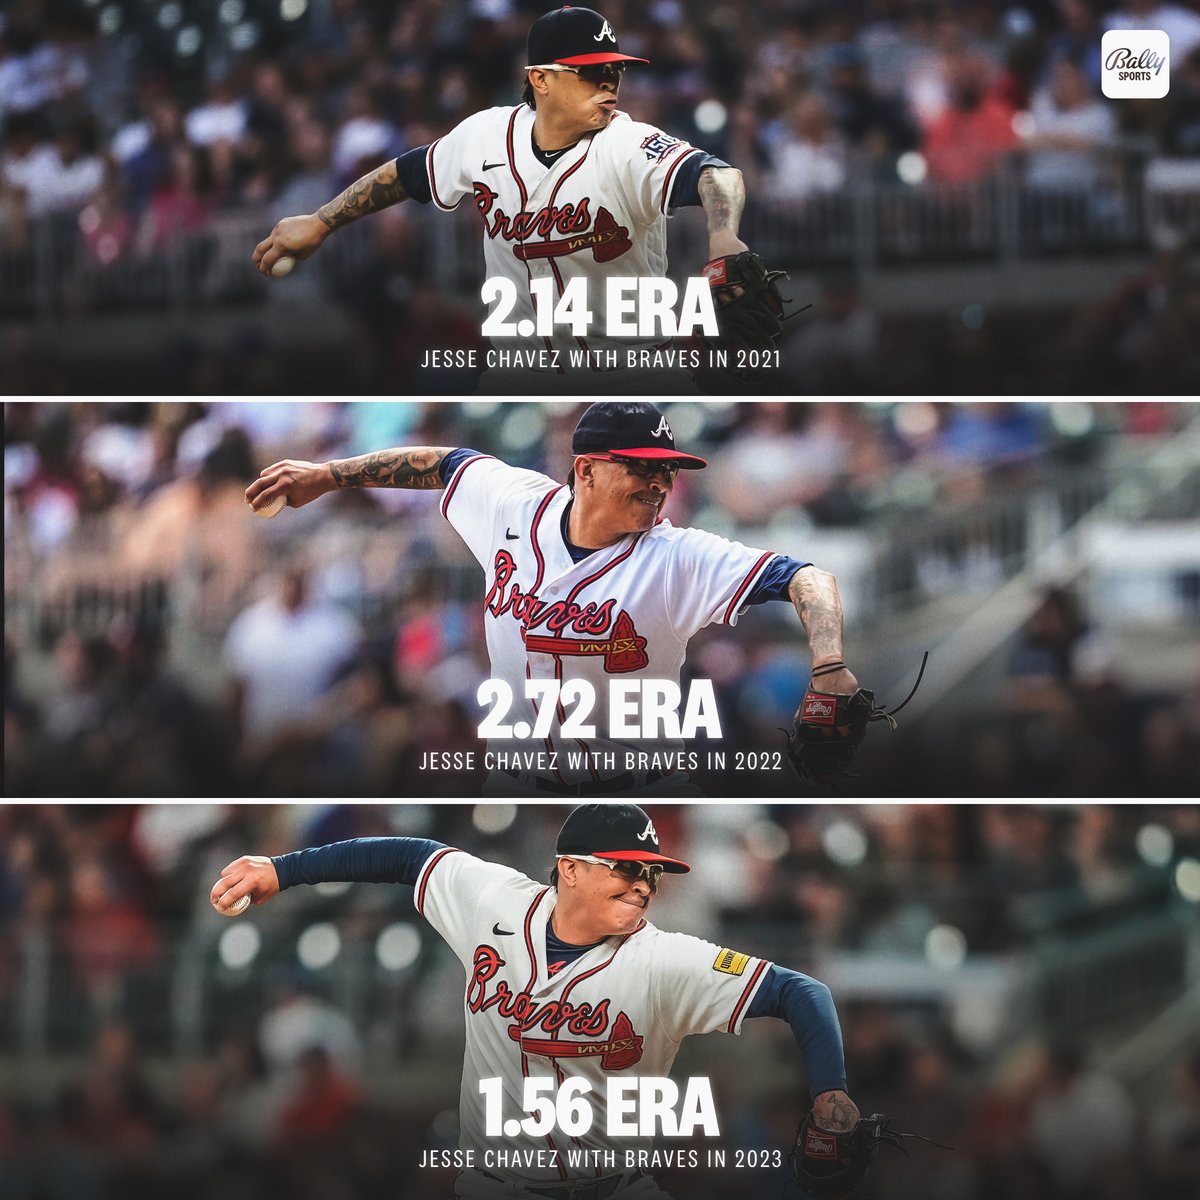 Will Jesse Chavez do it 𝗮𝗴𝗮𝗶𝗻 in 2024? 👀